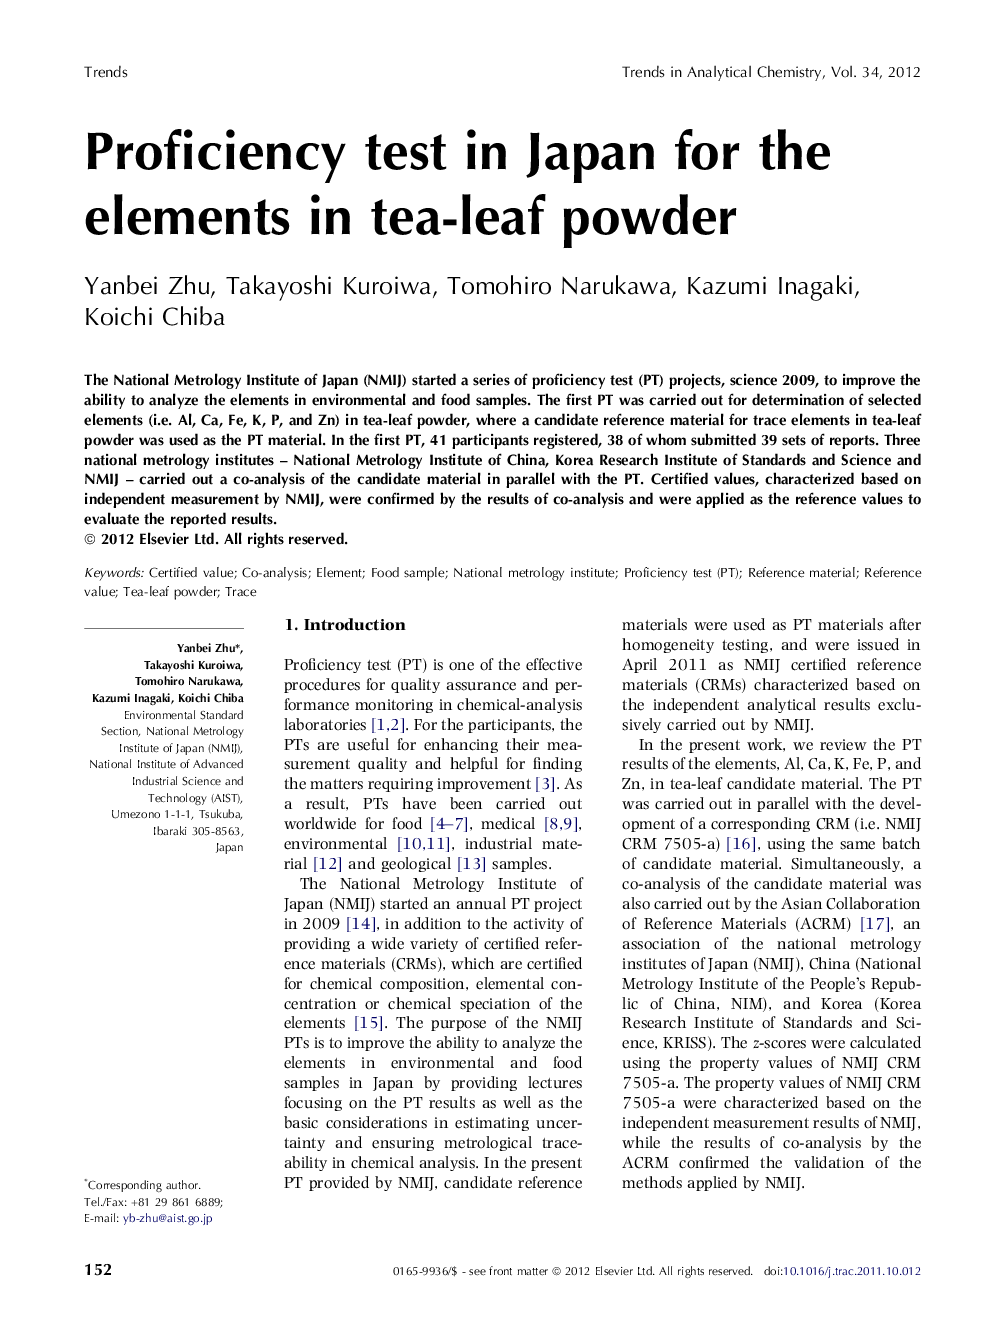 Proficiency test in Japan for the elements in tea-leaf powder